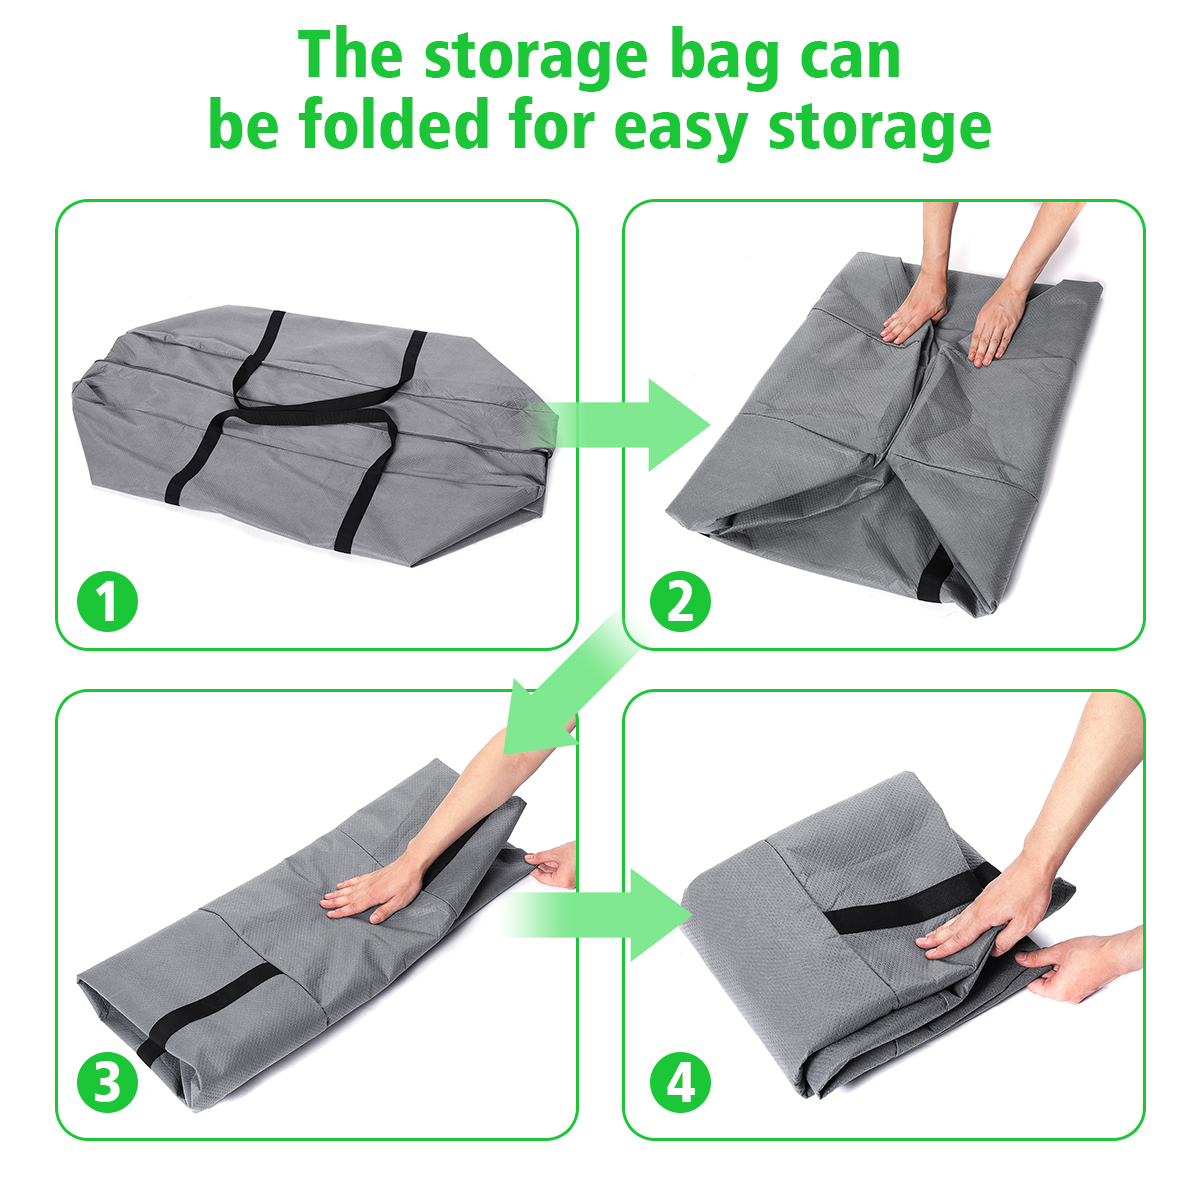 Tvird-Extra-Large-Storage-Bag-for-Cushion-Garden-Furniture-Foldable-Waterproof-Heavy-Duty-Outdoor--S-1950094-2